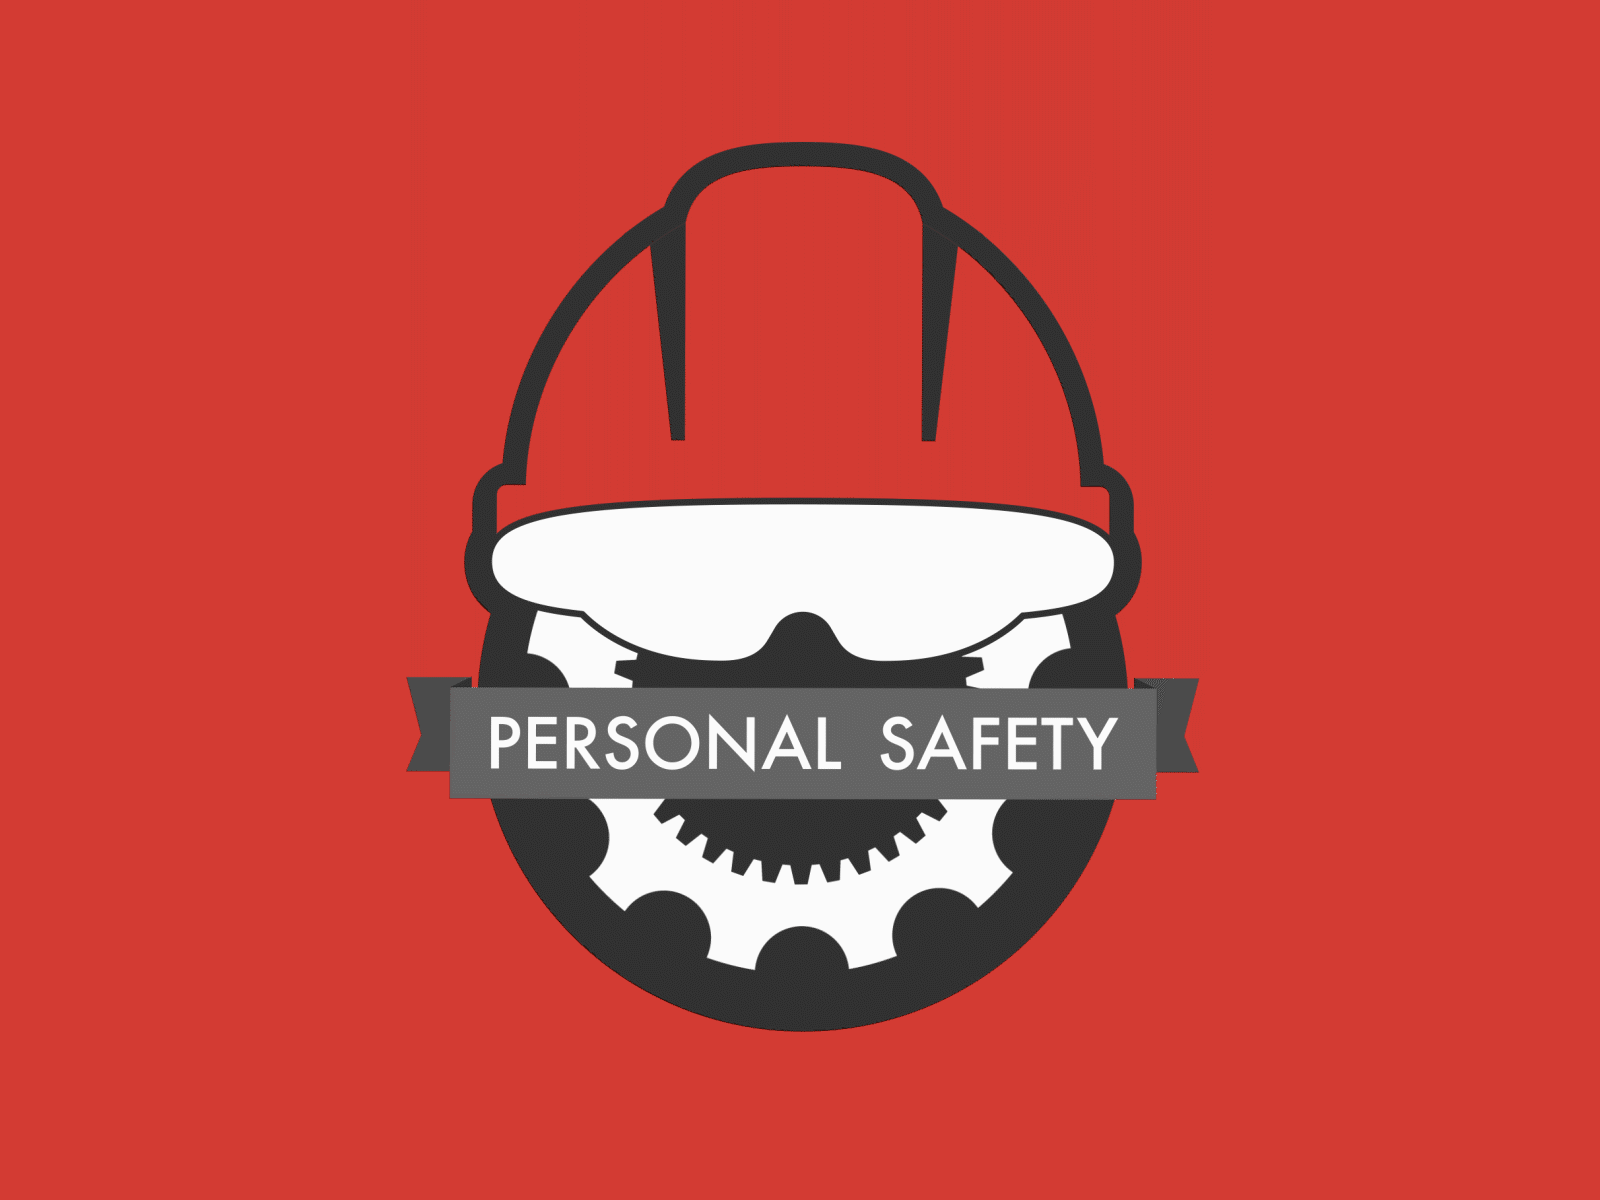 Personal Safety Animated logo after effects elearning environmental health and safety factory gears gif hard hat illustration logo manufacturing motion graphic personal protection personal protection equipment ppe protection training